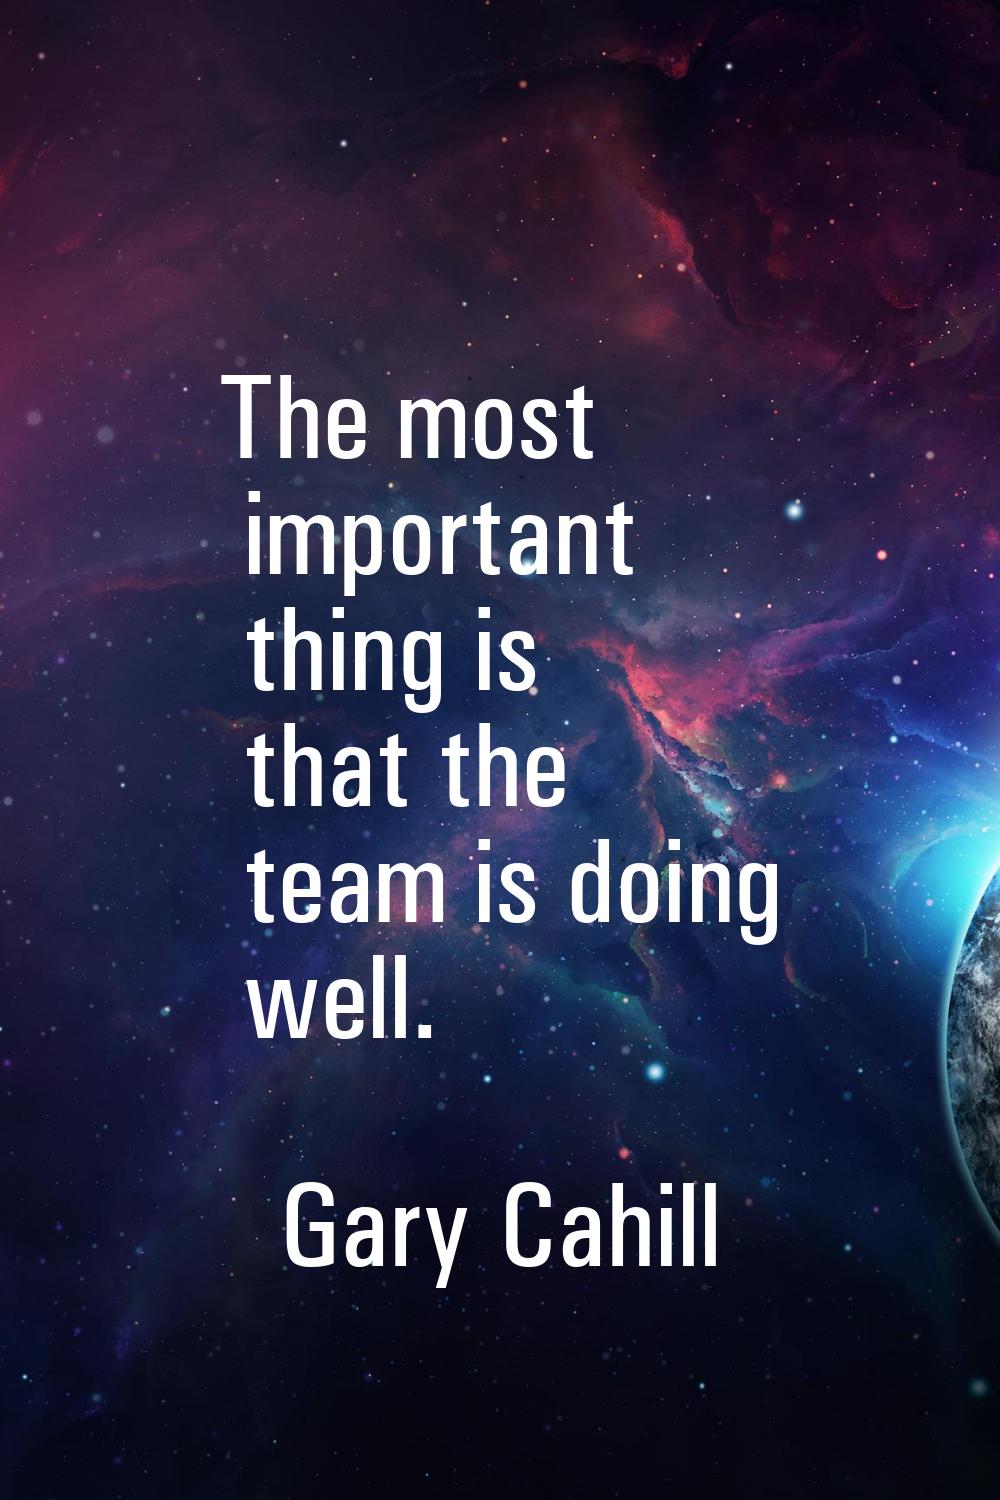 The most important thing is that the team is doing well.